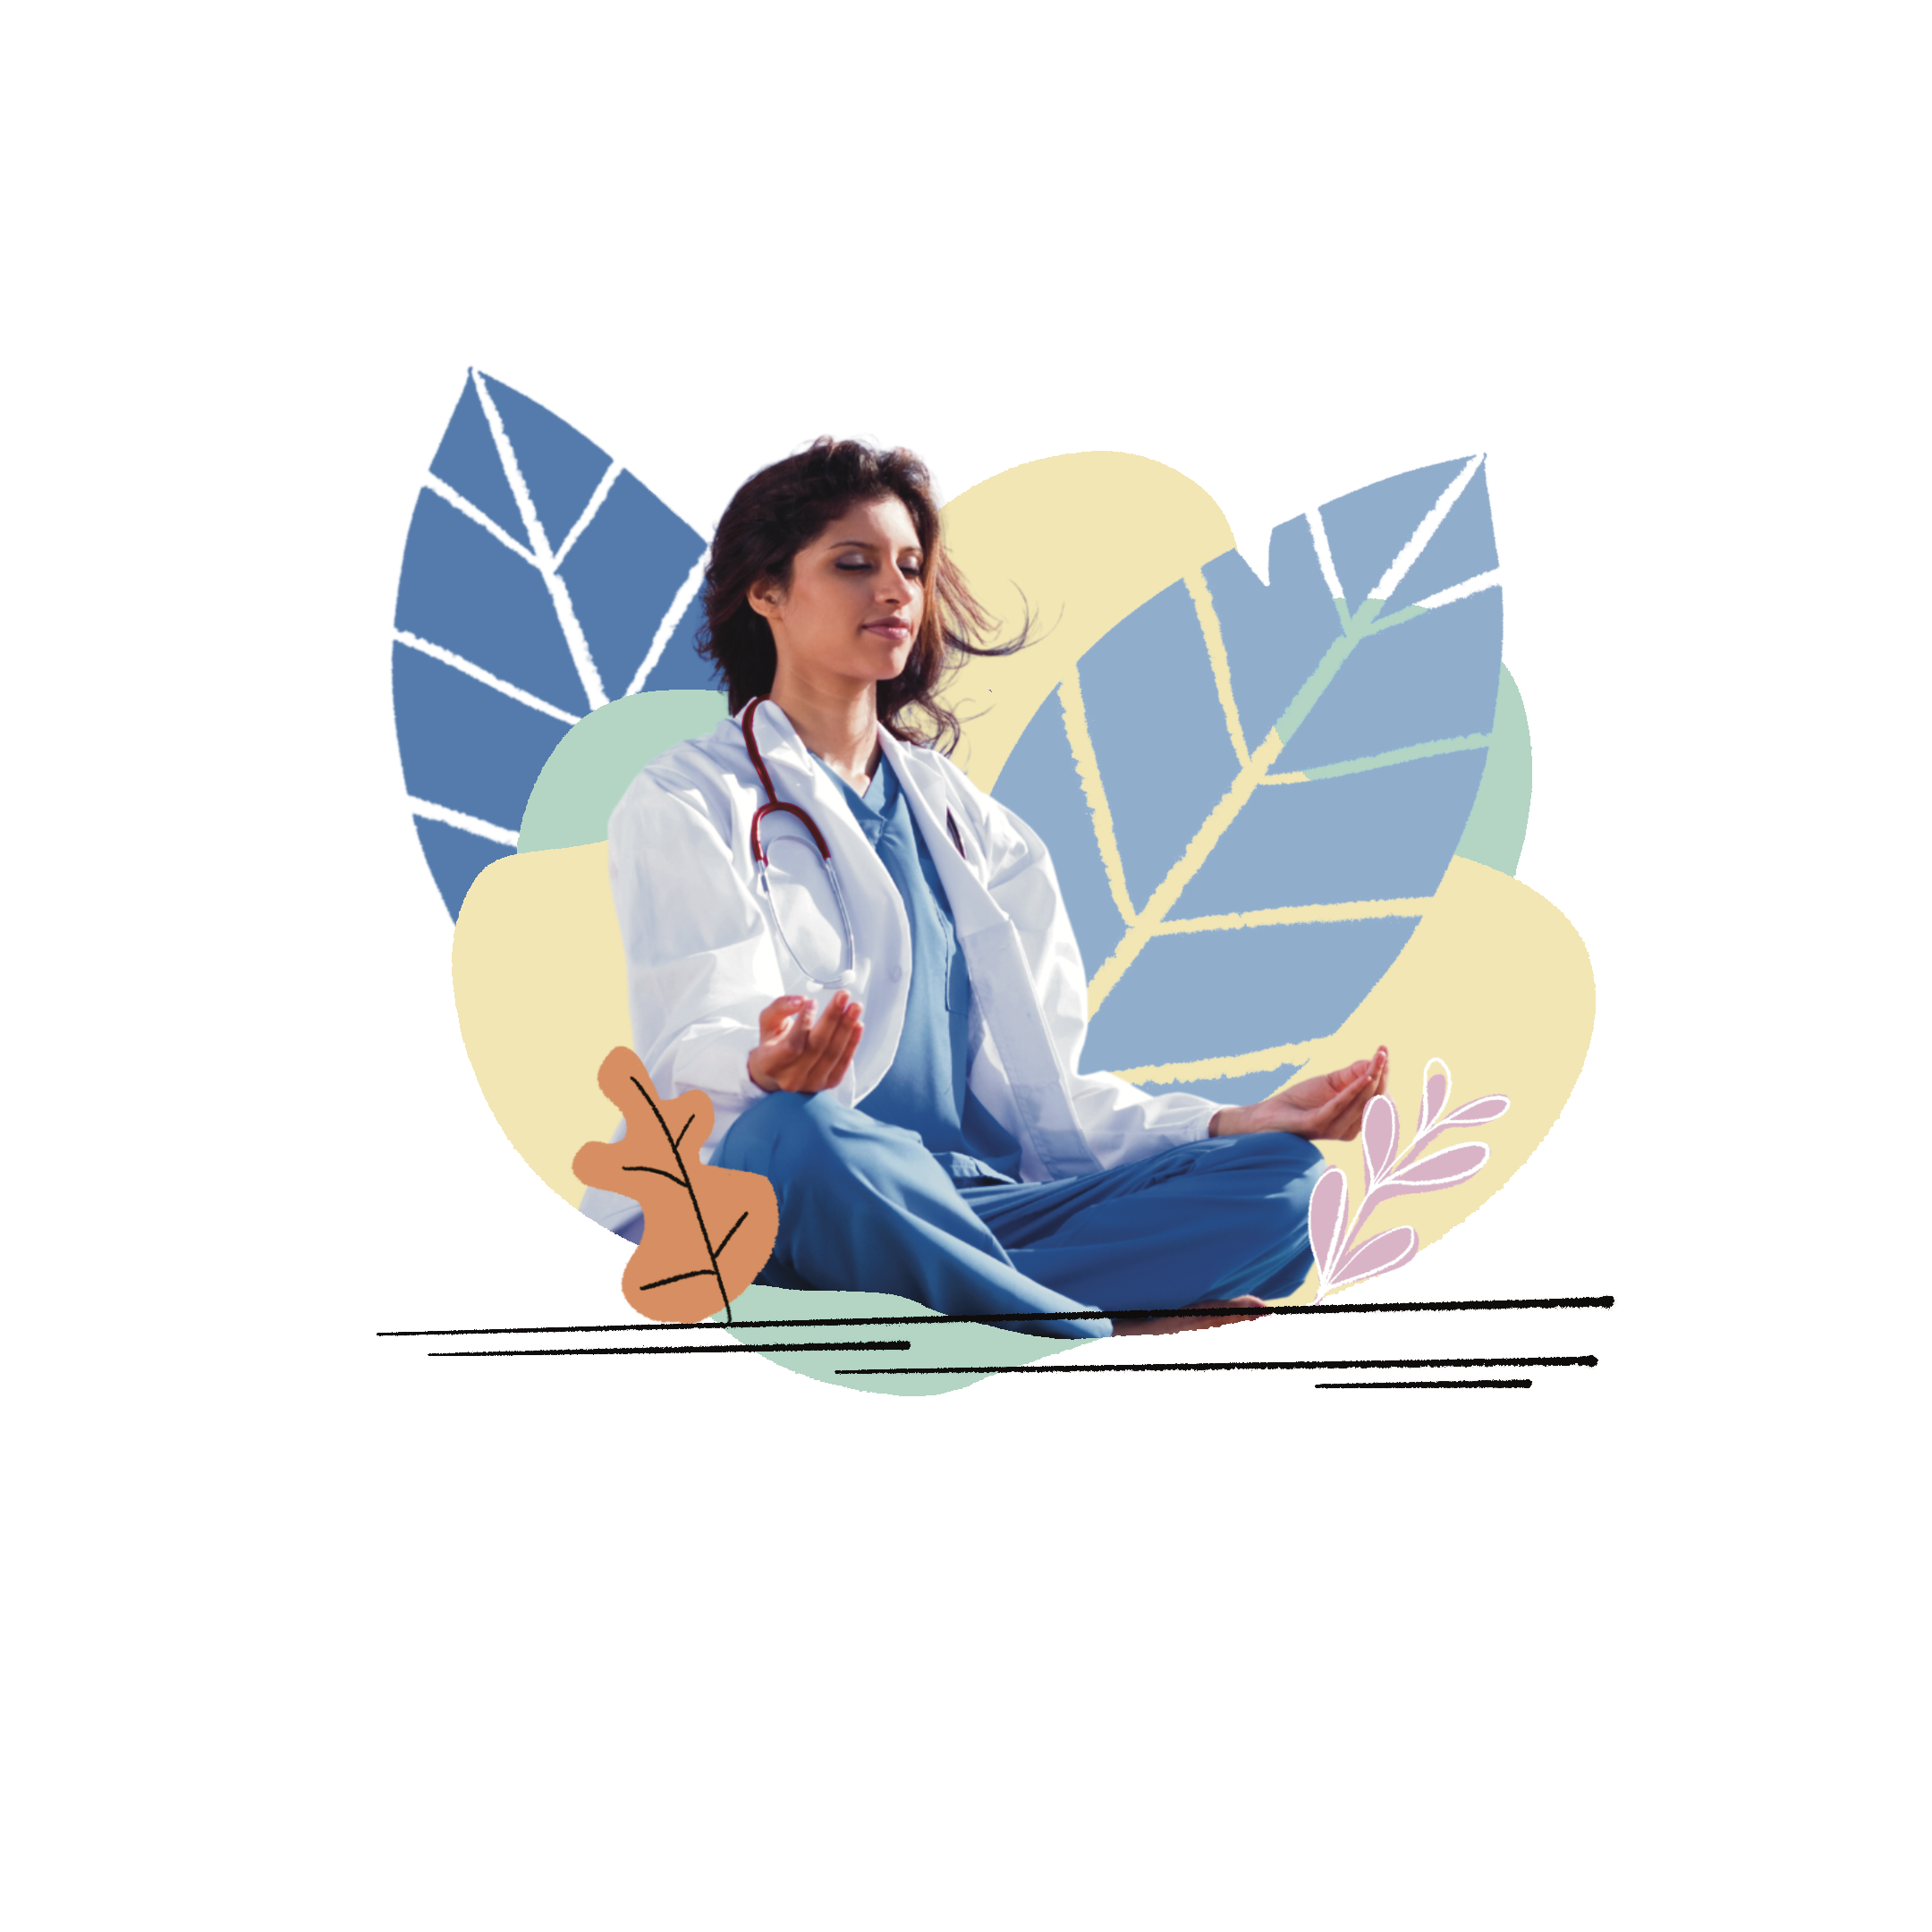 Illustration of a doctor in lotus pose